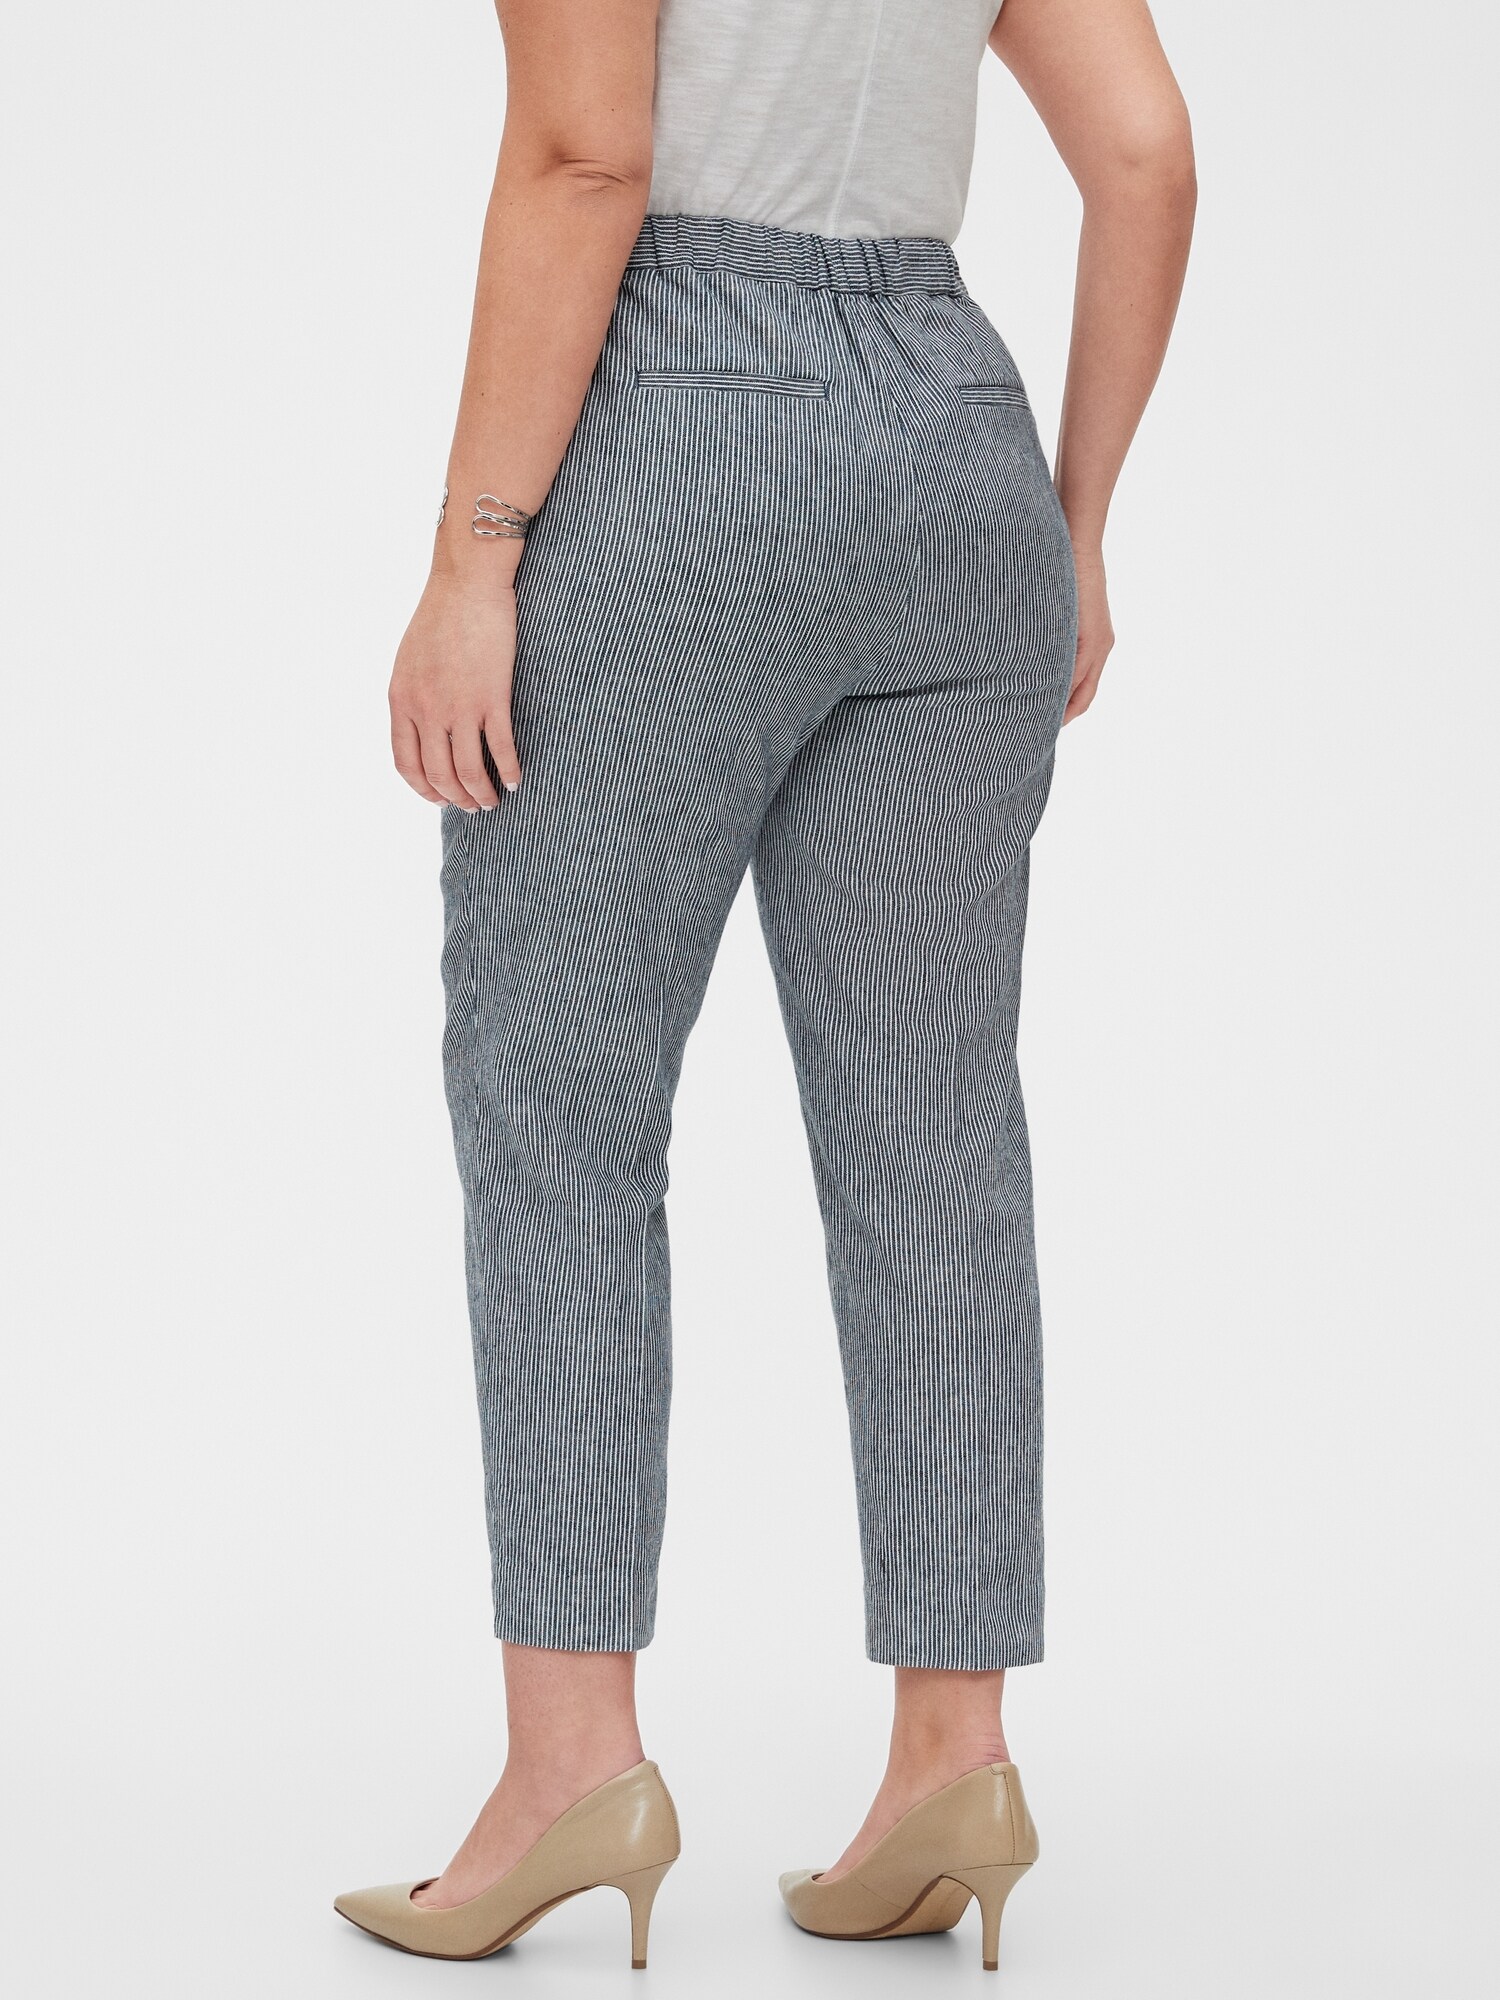 Hayden Striped Stretch Linen Pull-On Soft Ankle Pant